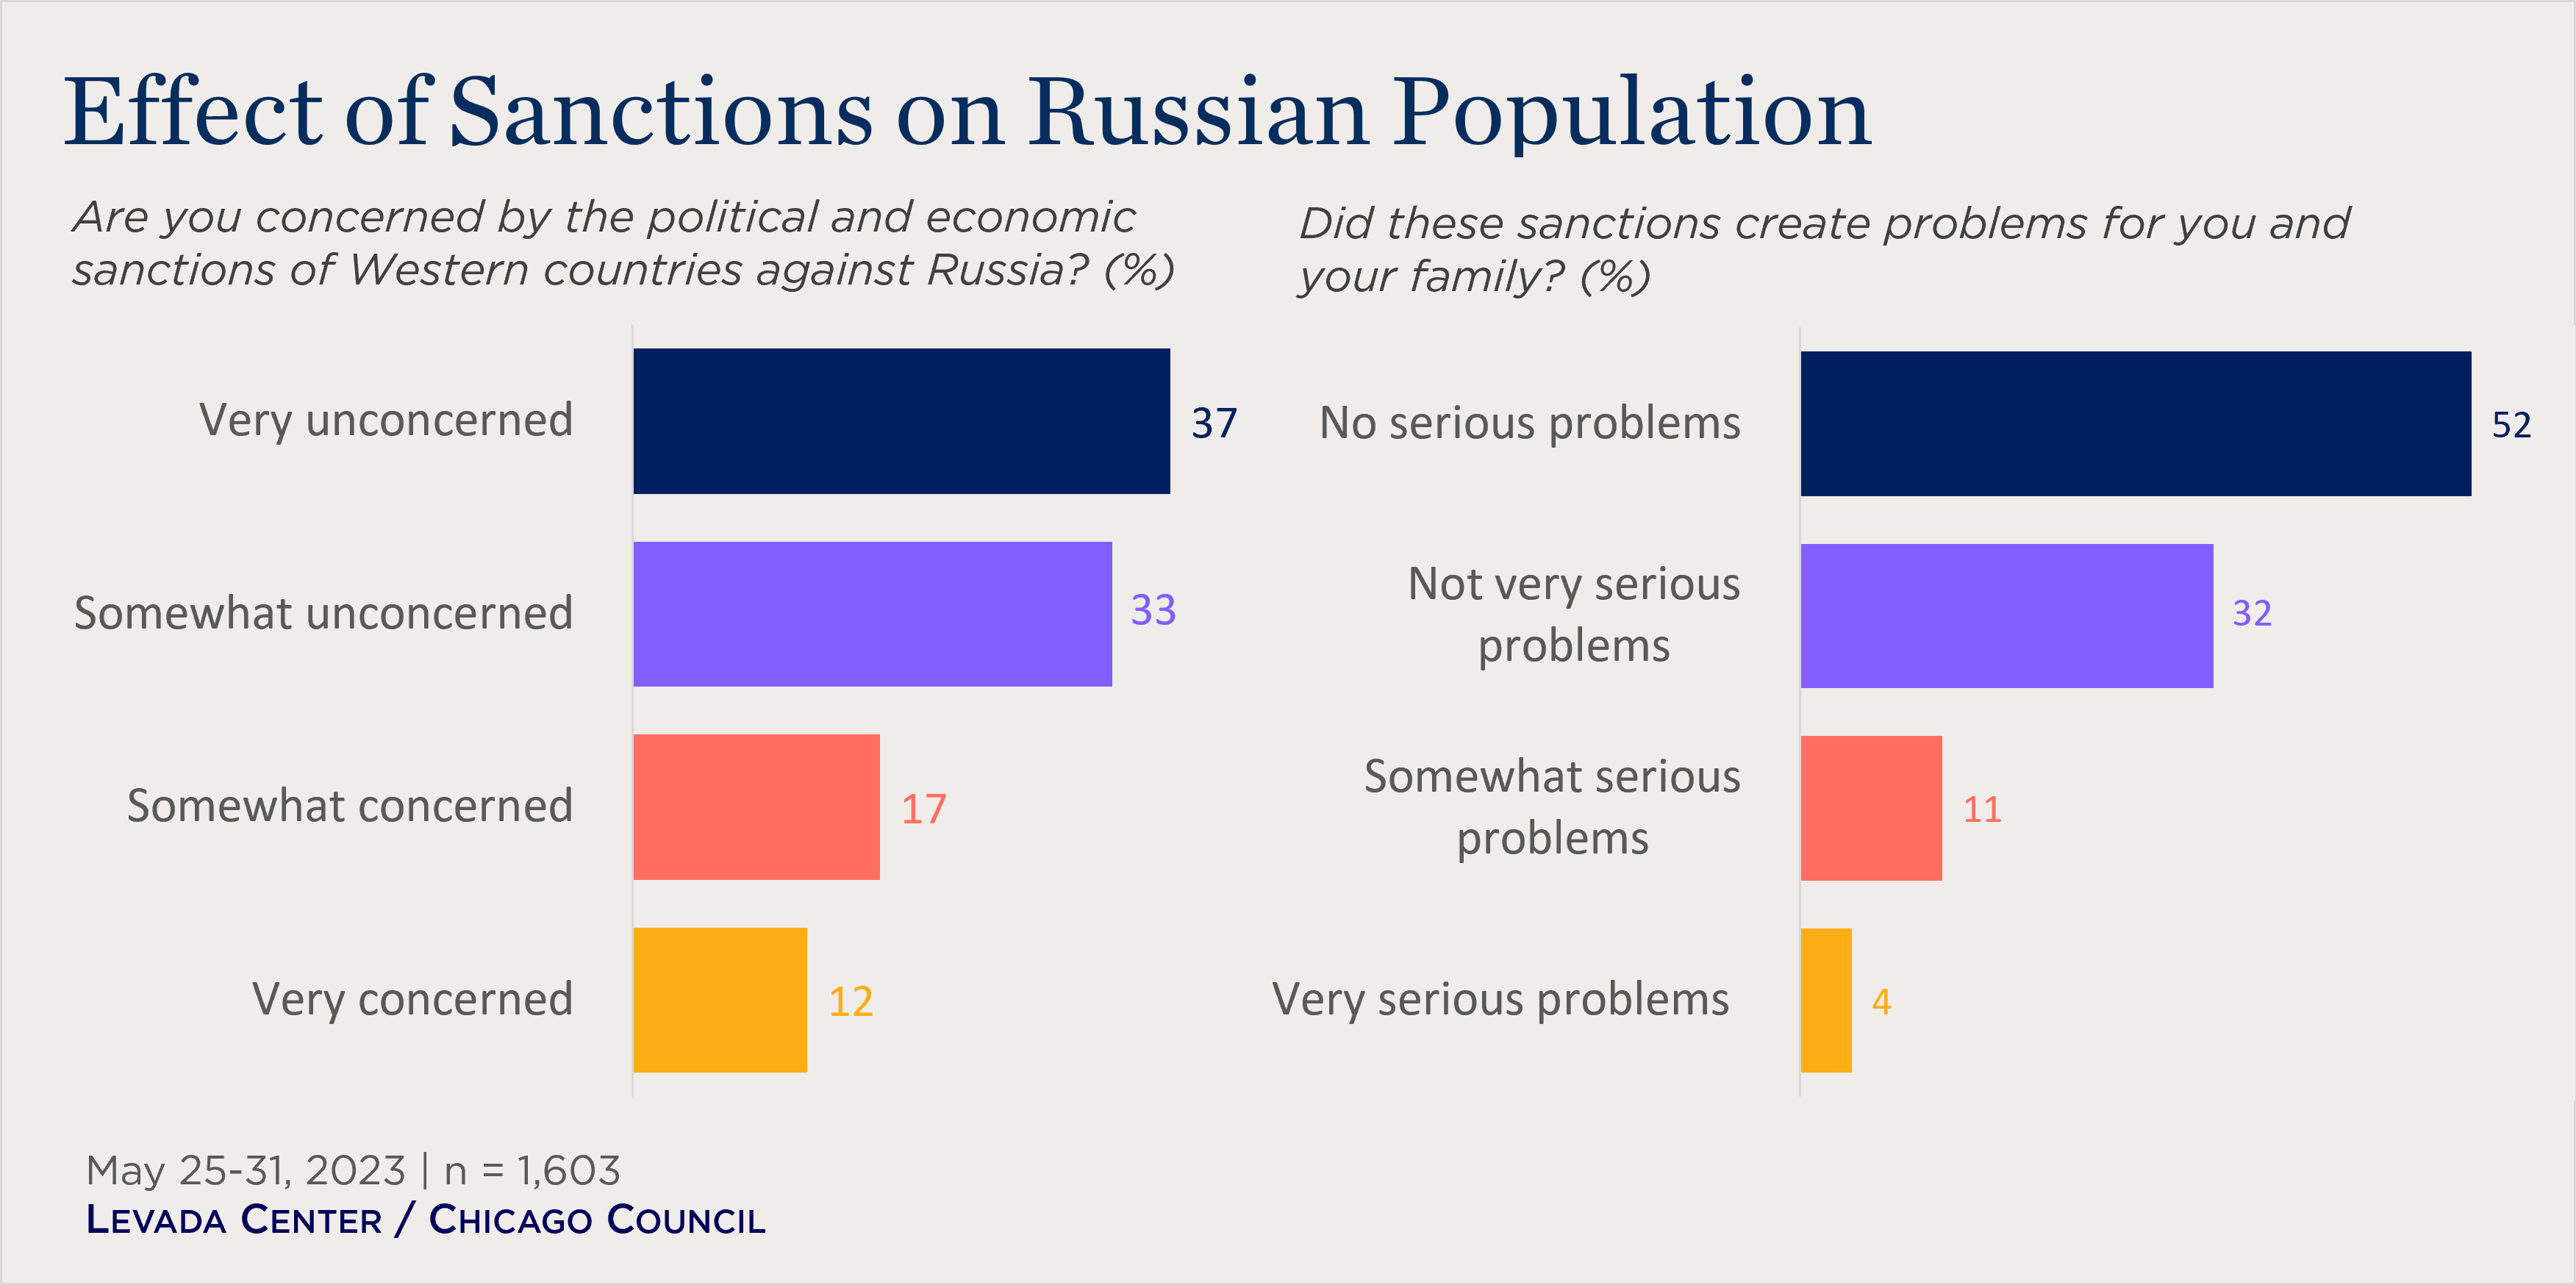 "bar chart showing effects of sanctions on Russian population"